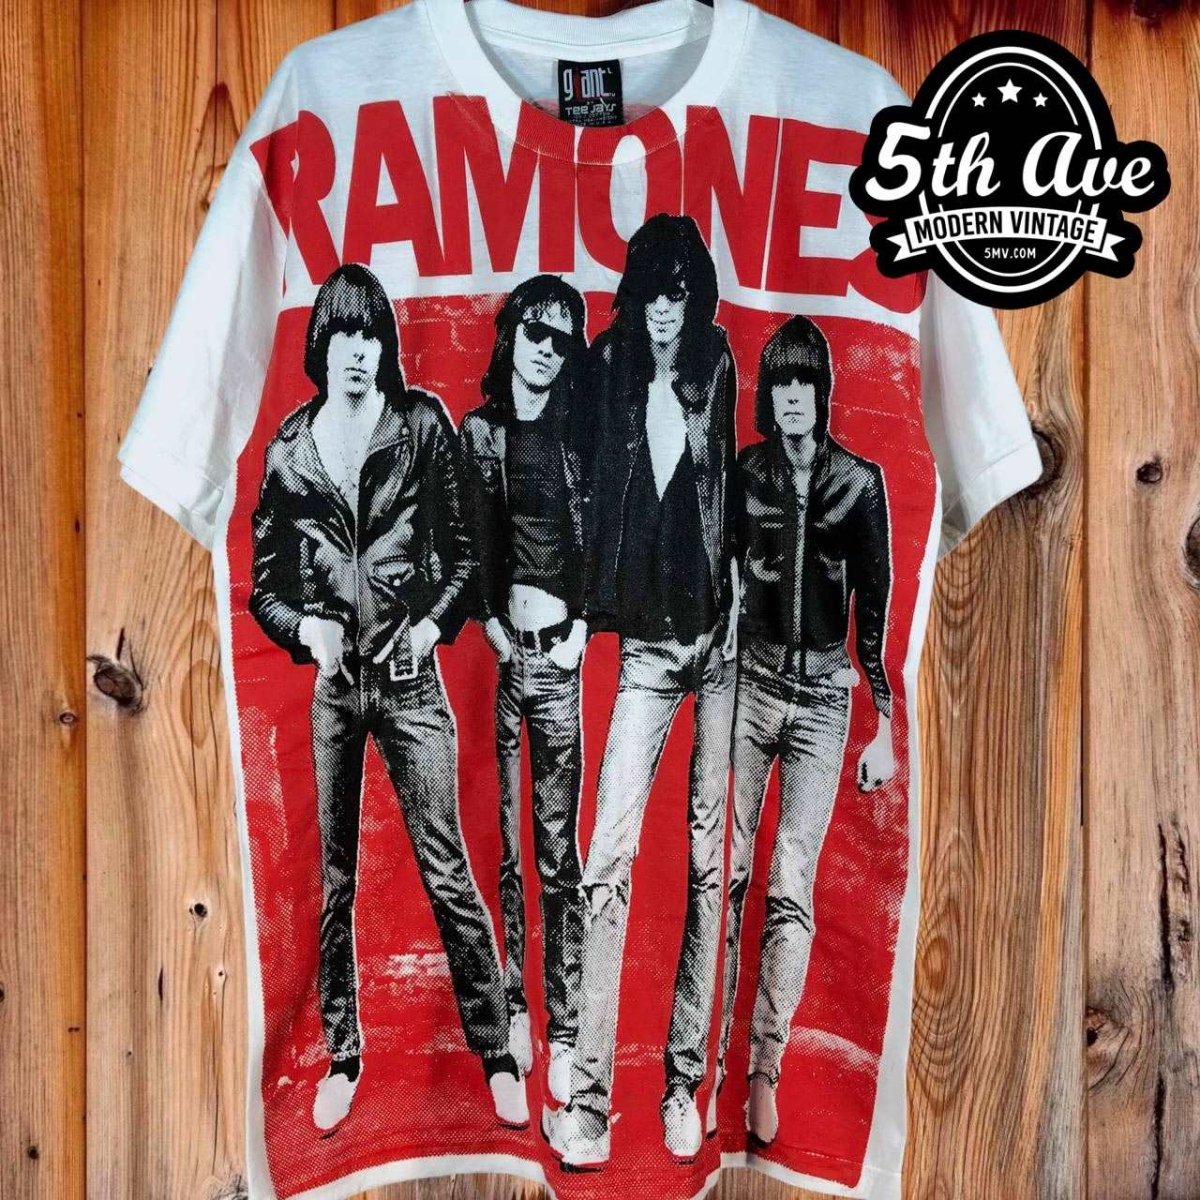 The Ramones - AOP all over print New Vintage Band T shirt 